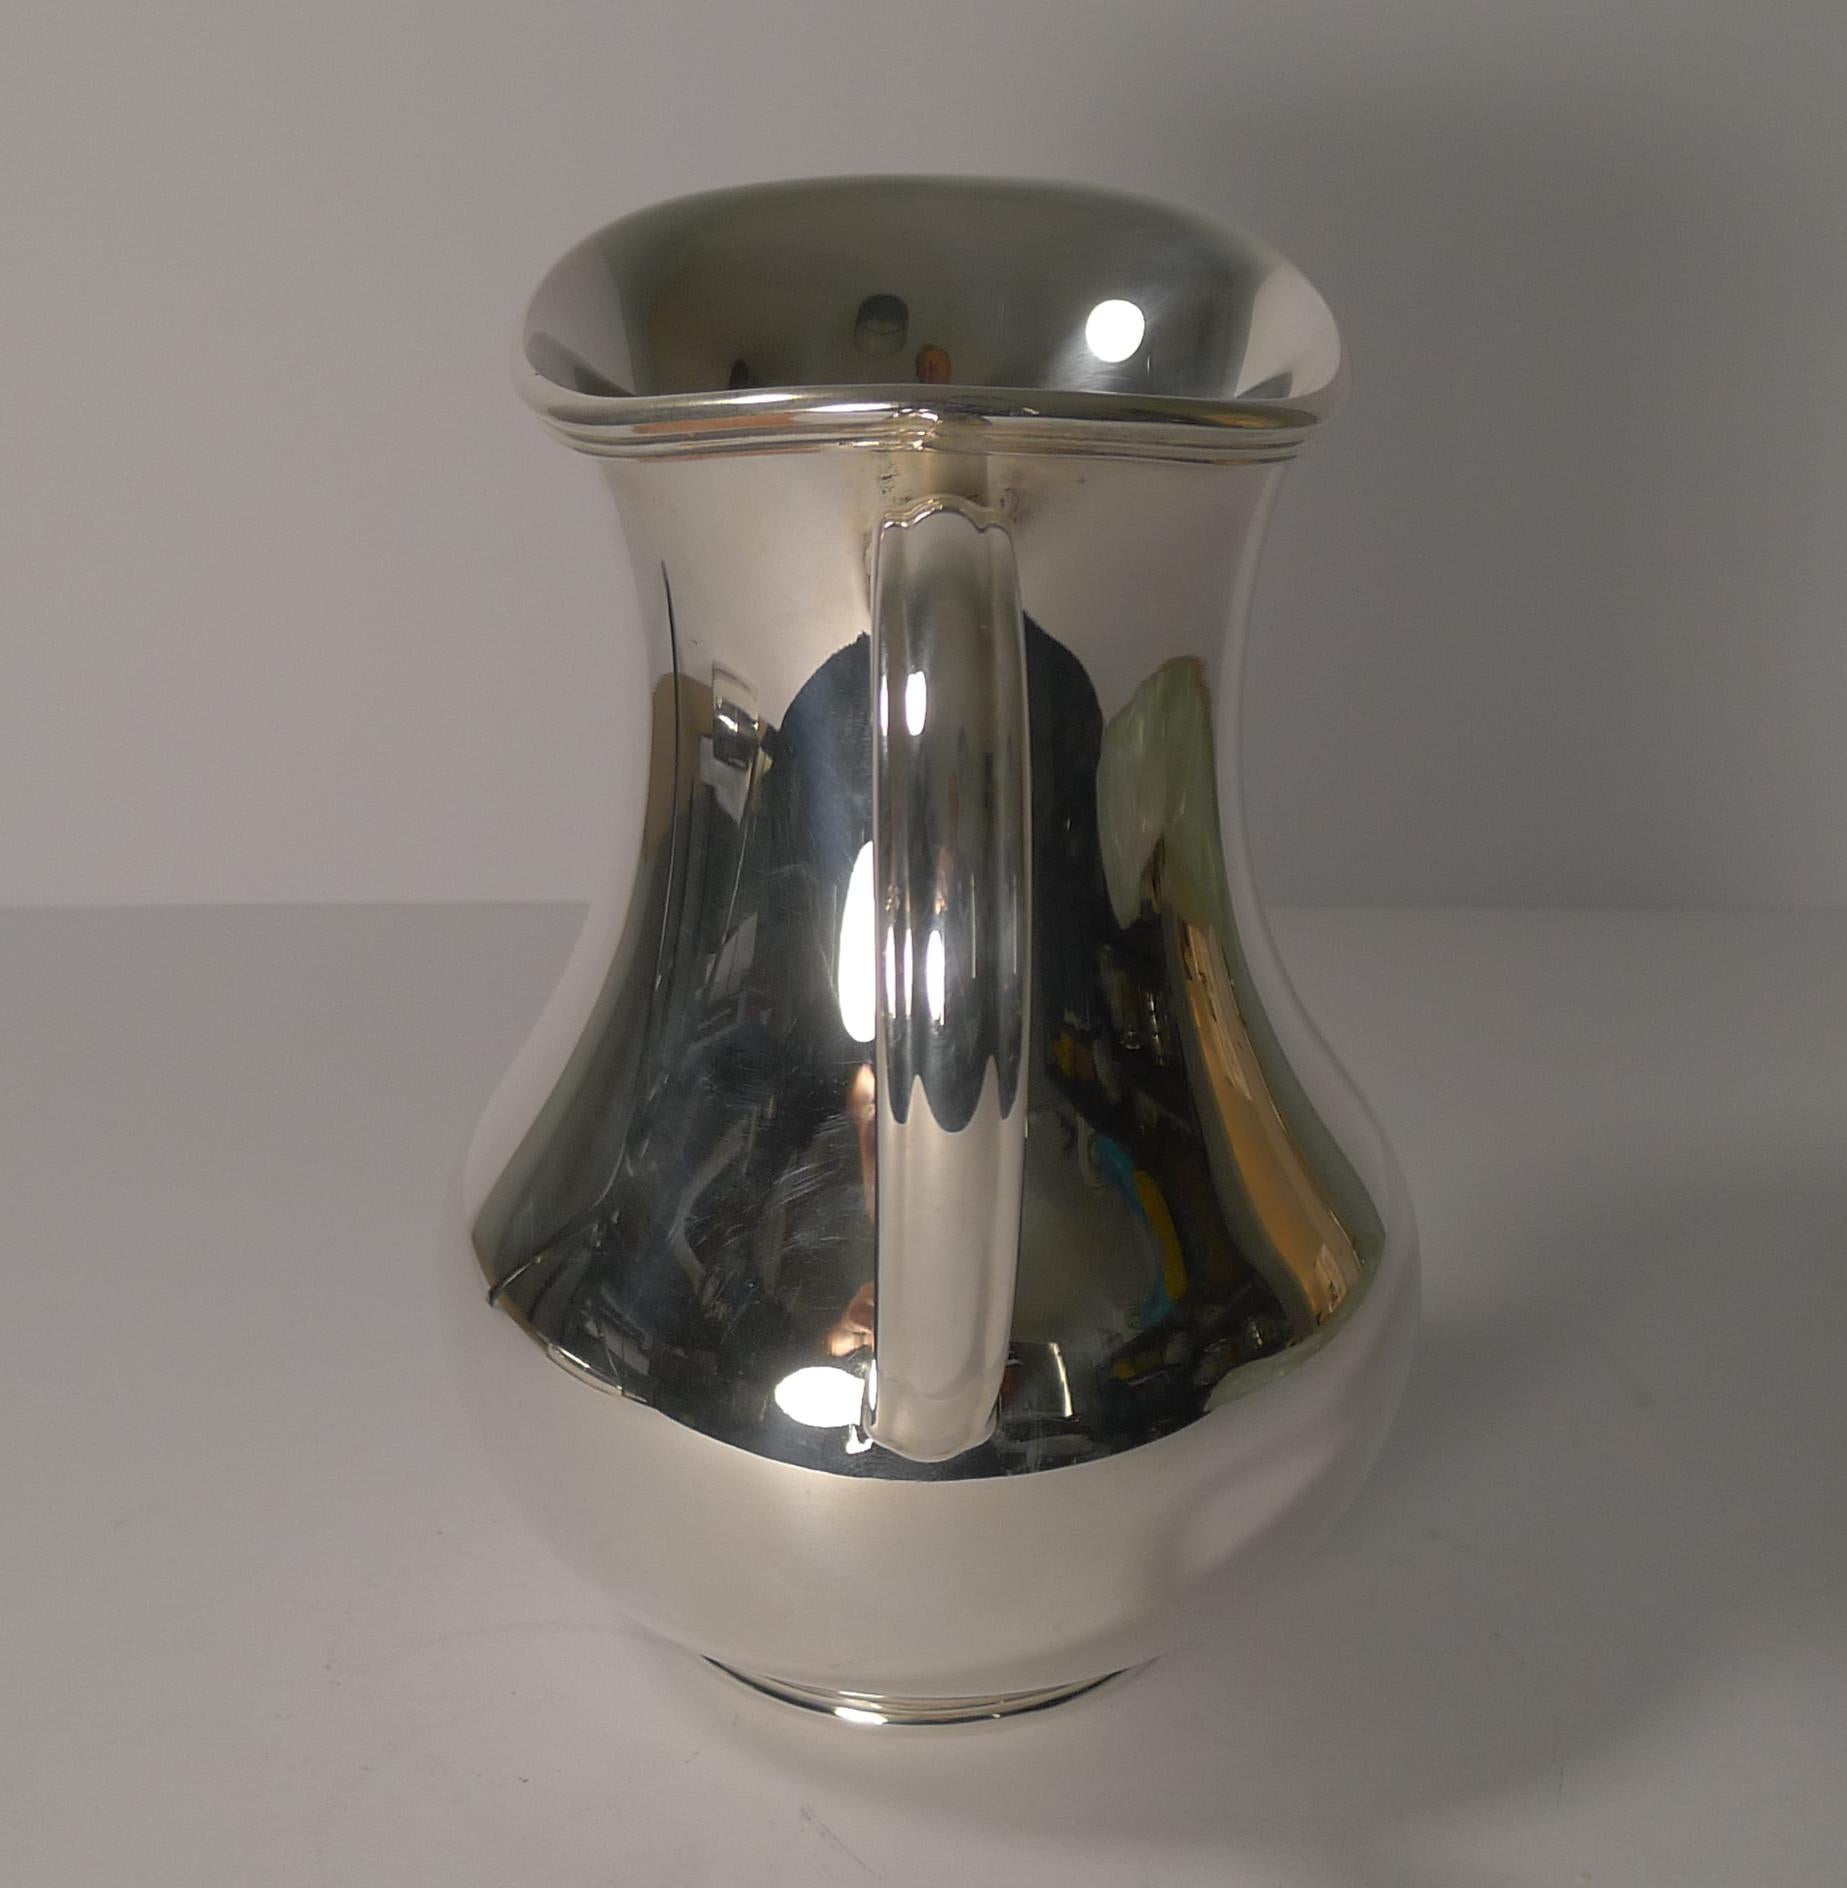 Dating to the 20th century, this Art Deco style jug or pitcher is perfect for your drinks tray or bar trolley.

It is fully marked on the underside for the top notch silversmith, Christofle, France.

Excellent vintage condition measuring: 6